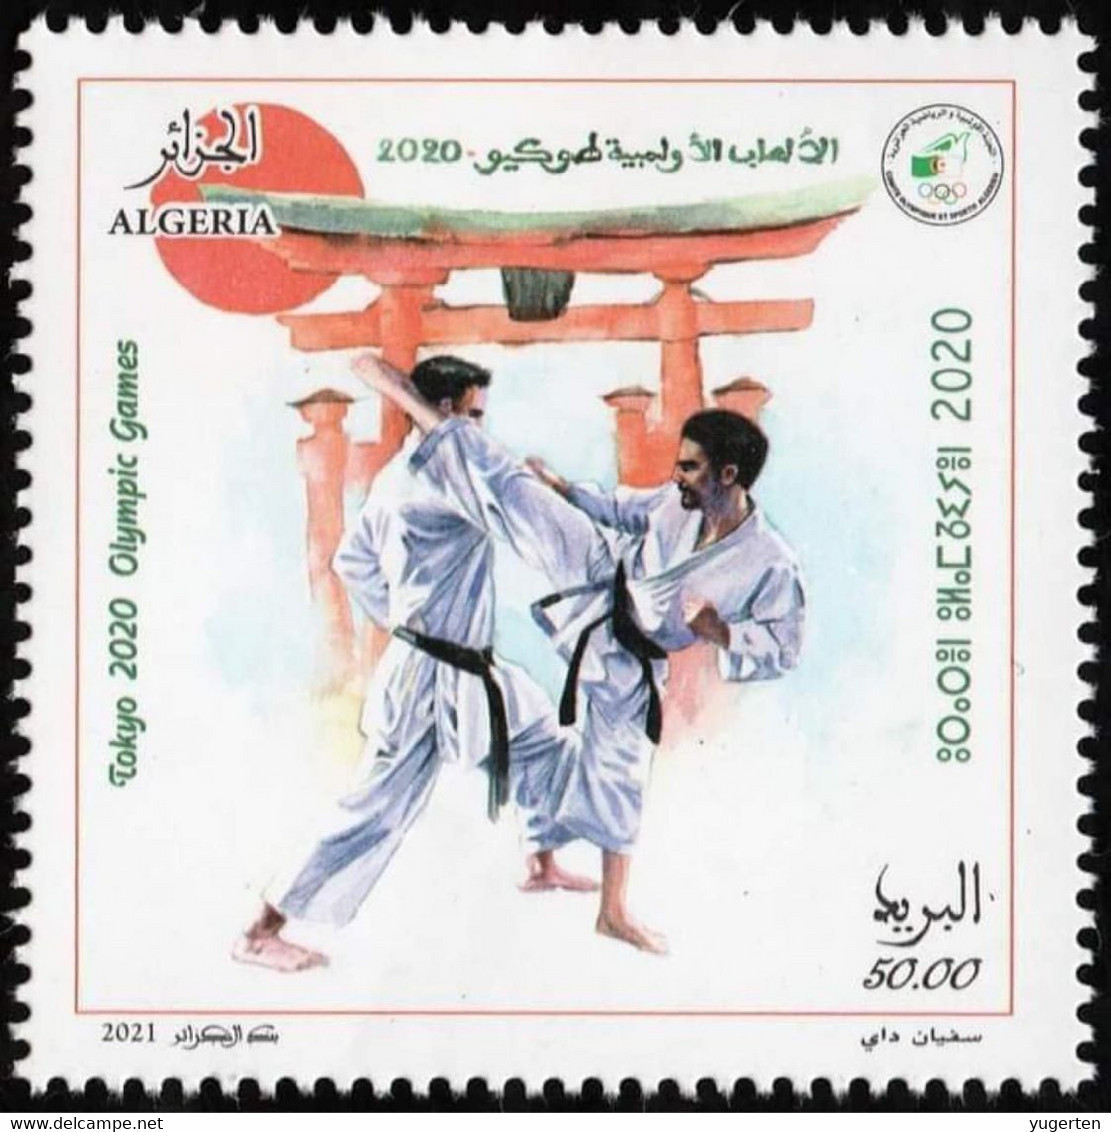 ALGERIA 2021 - 1 V - MNH - Karate - Olympic Games Tokyo JO Olympics Olympische Spiele Jeux Olympiques Japan - Ohne Zuordnung